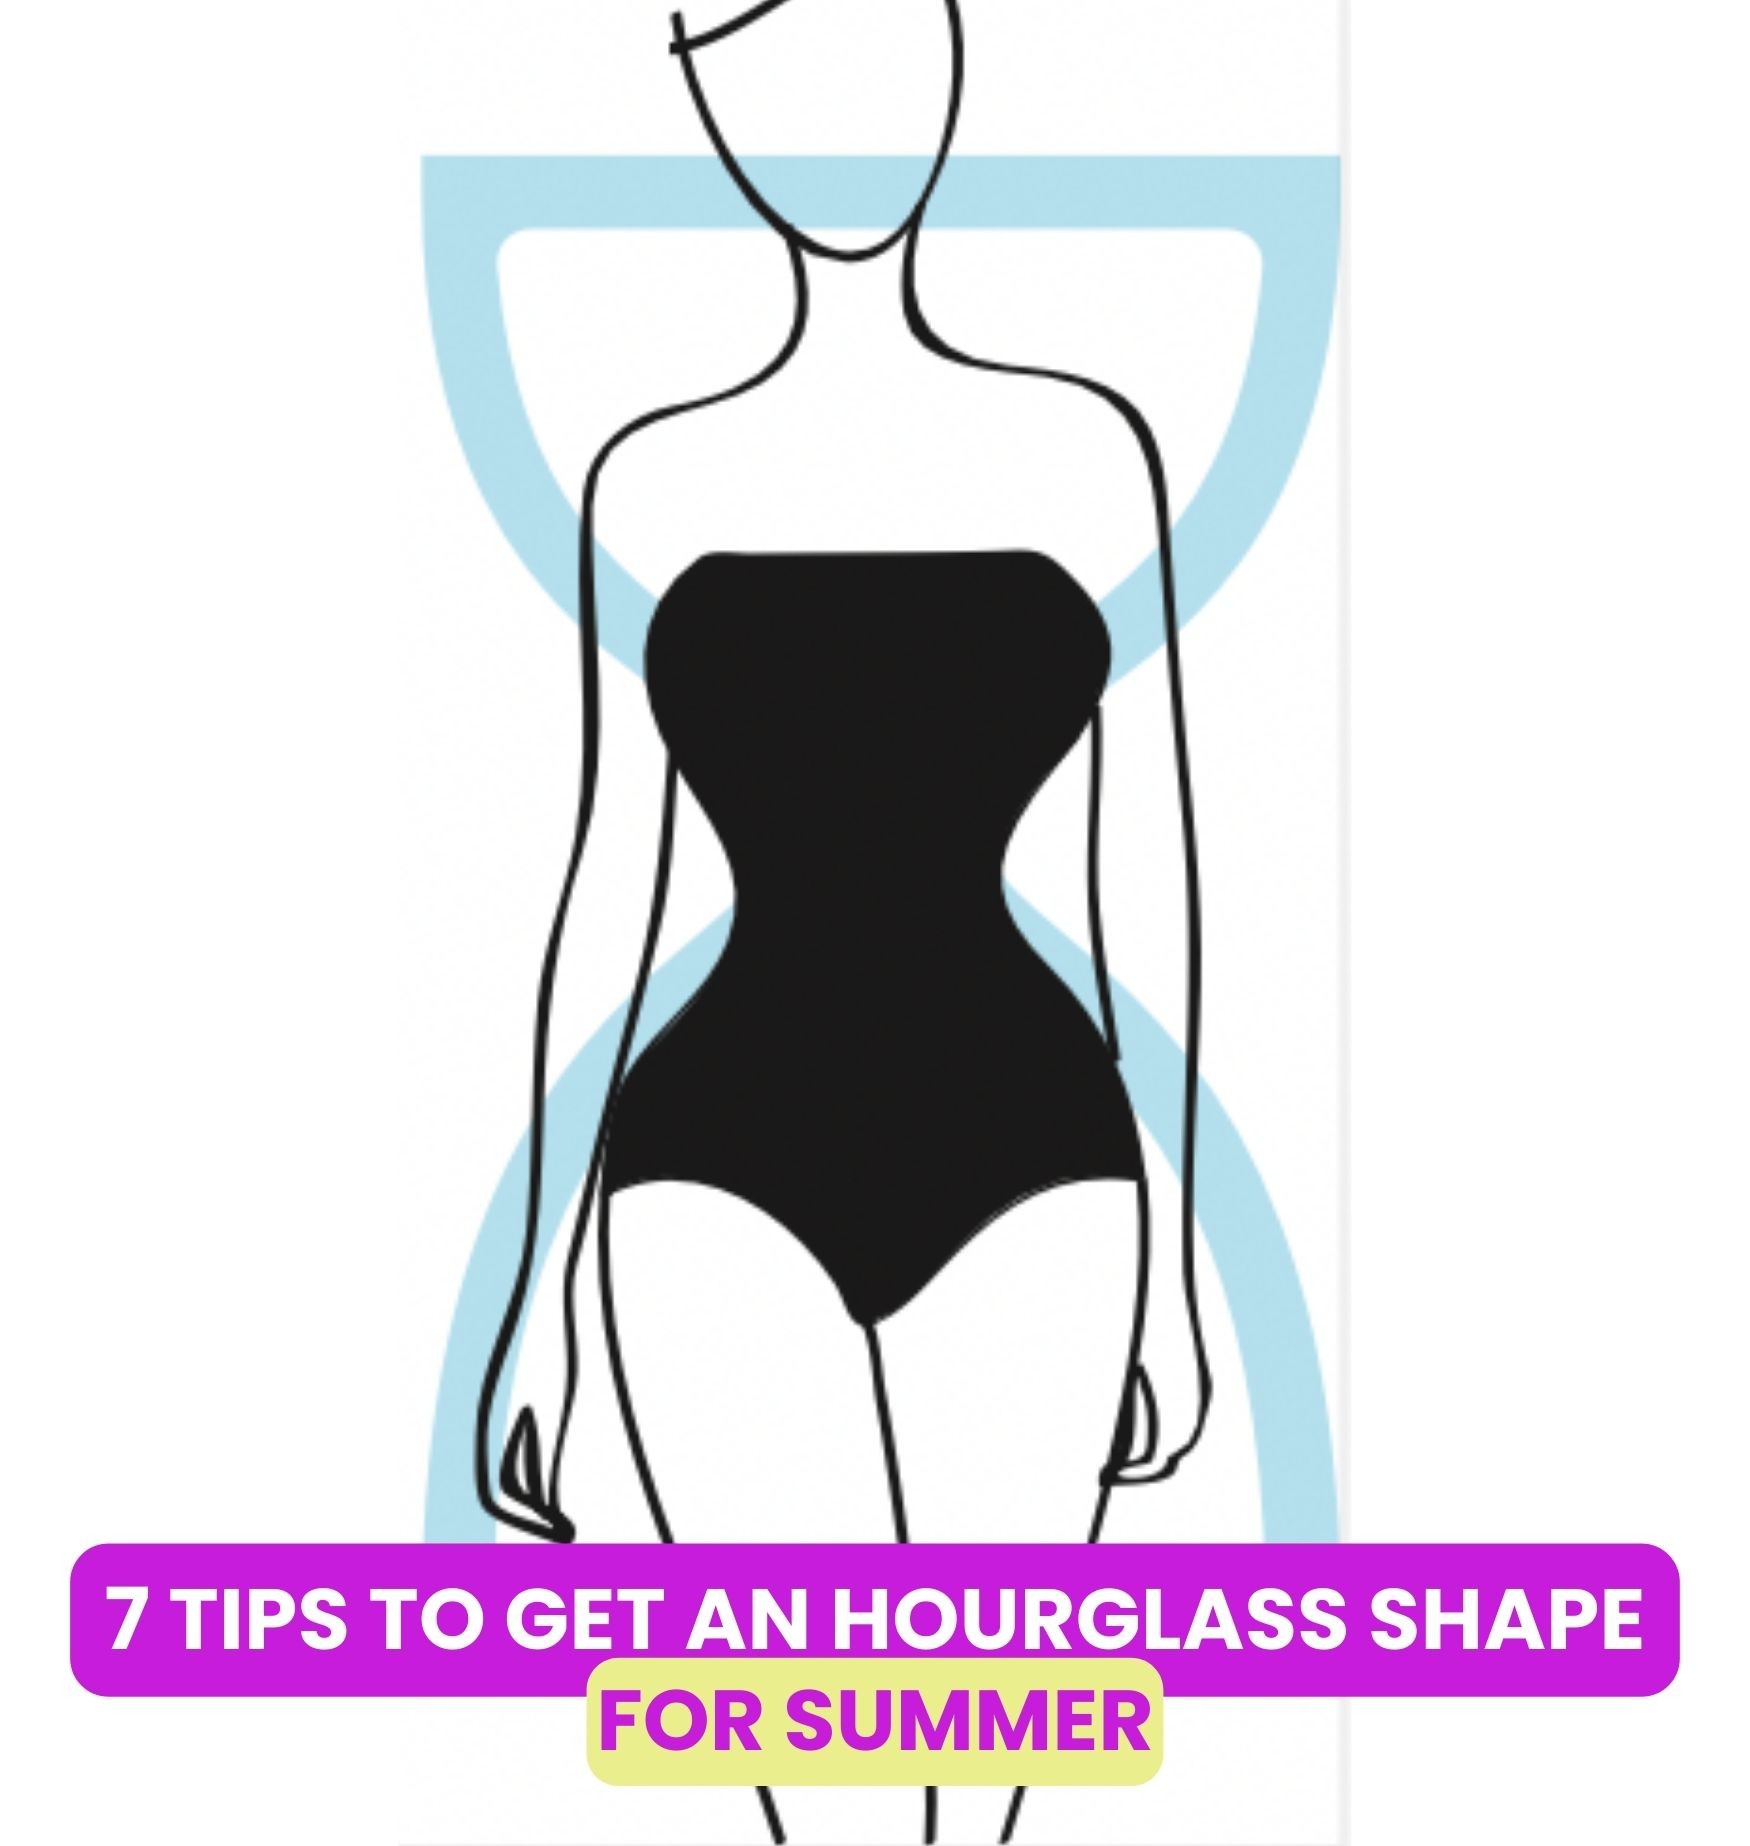 7 Tips to Get an Hourglass Shape for Summer